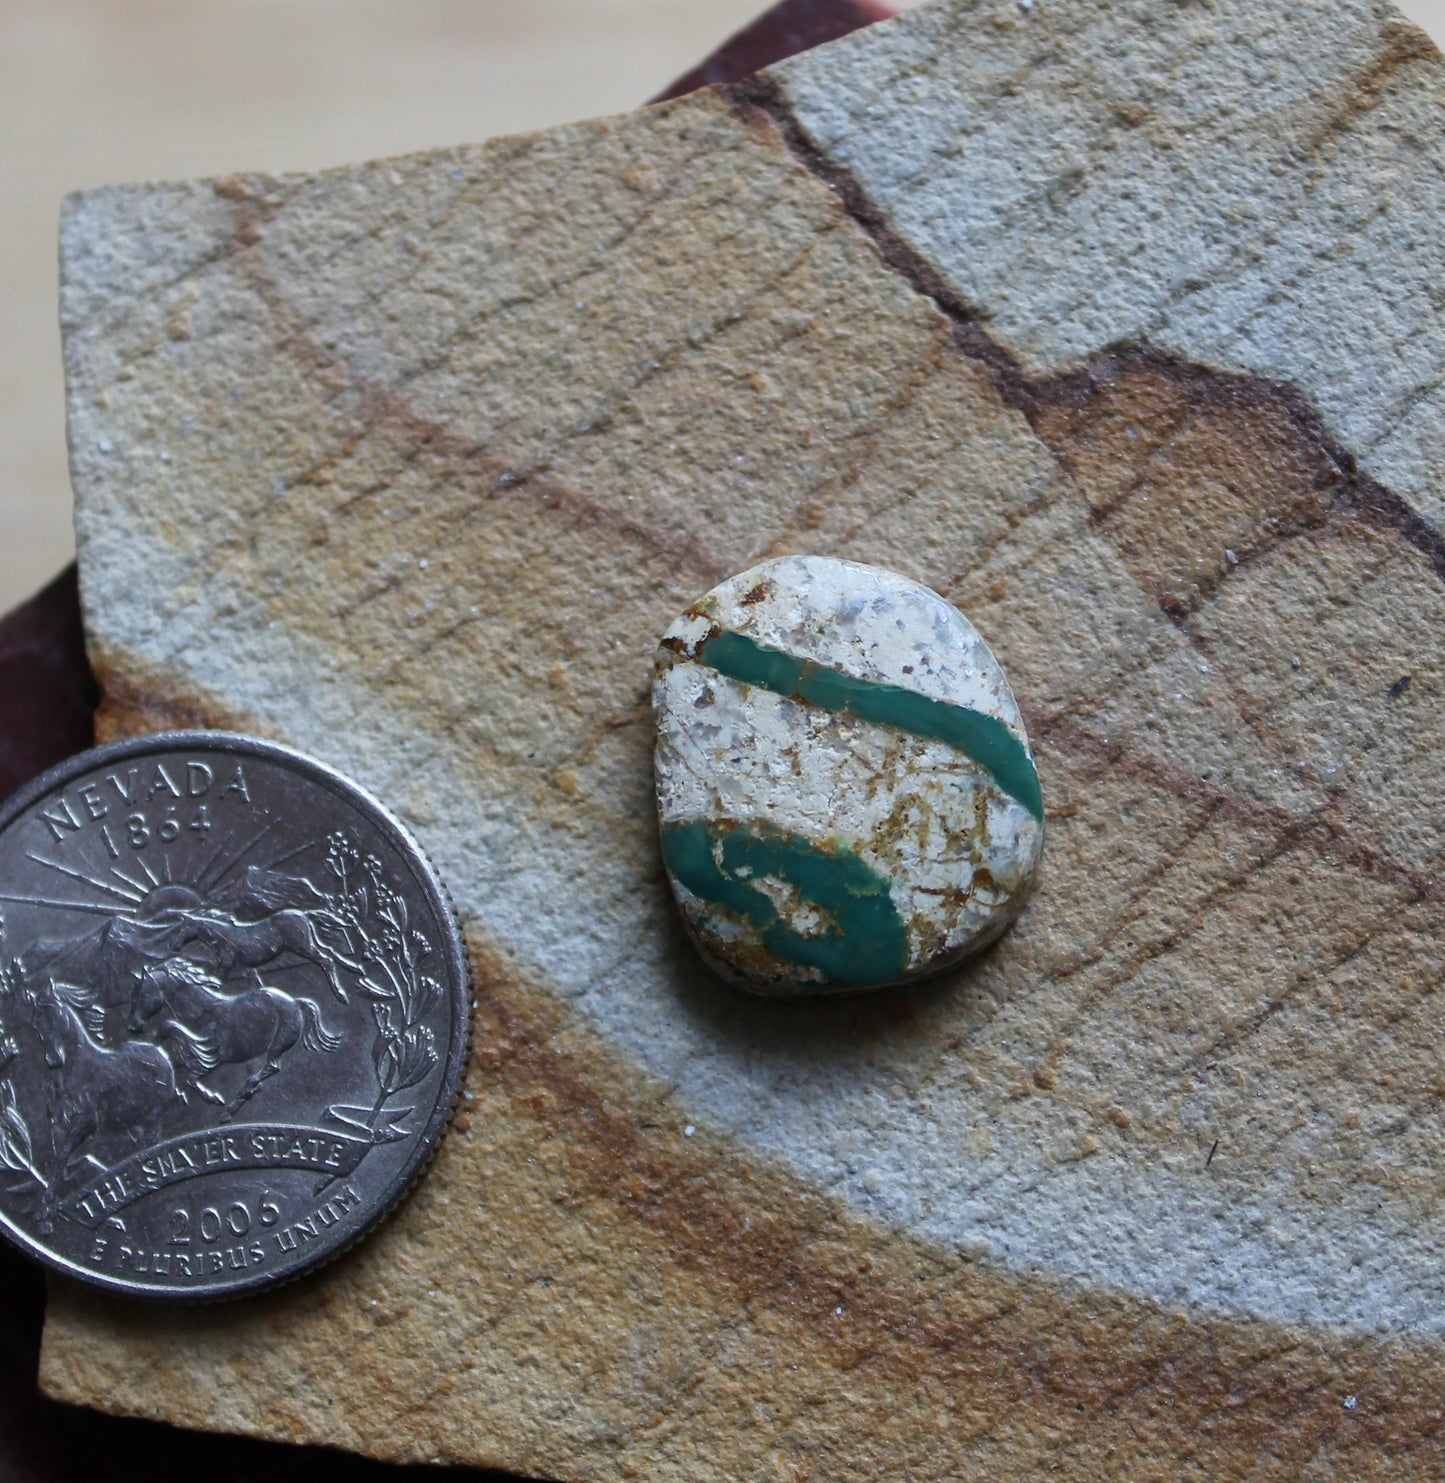 10 carat boulder-cut Stone Mountain Turquoise cabochon with green veins